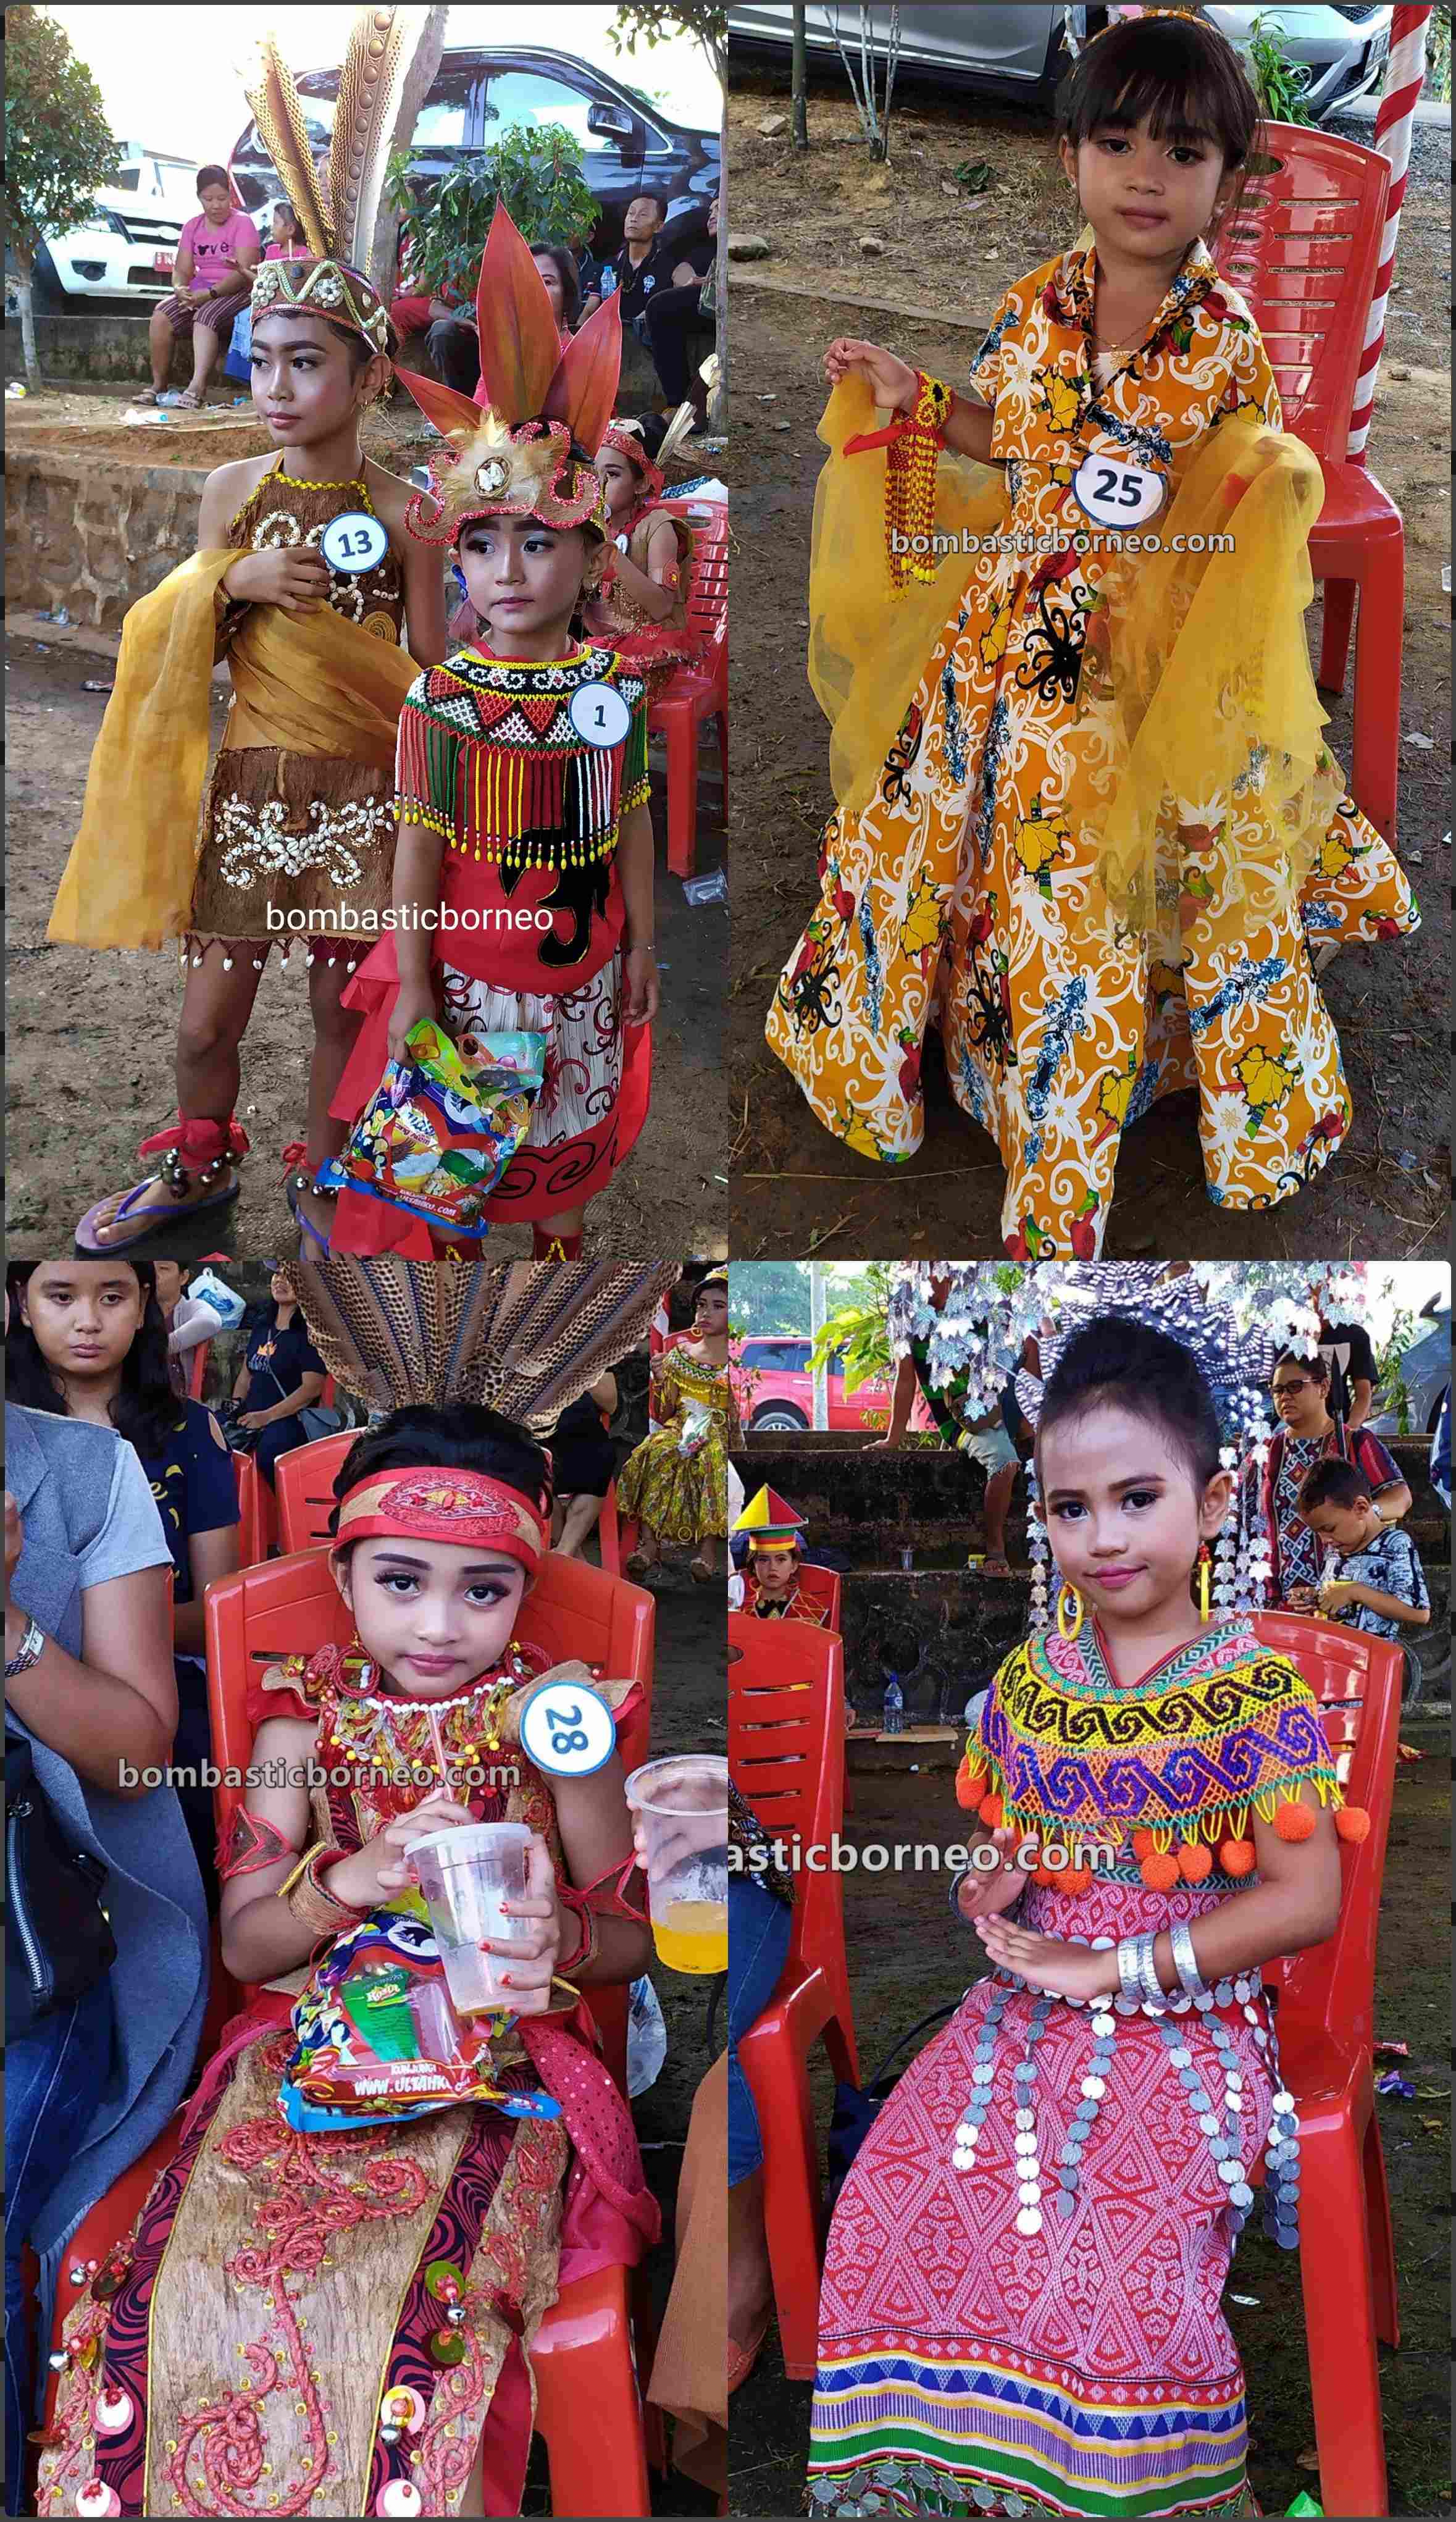 Harvest Festival, authentic, traditional, culture, backpackers, Ethnic, tribe, Kalimantan Barat, Tourism, tourist attraction, travel guide, Borneo, 婆罗洲游踪, 西加里曼丹原住民, 上侯达雅丰收节日,